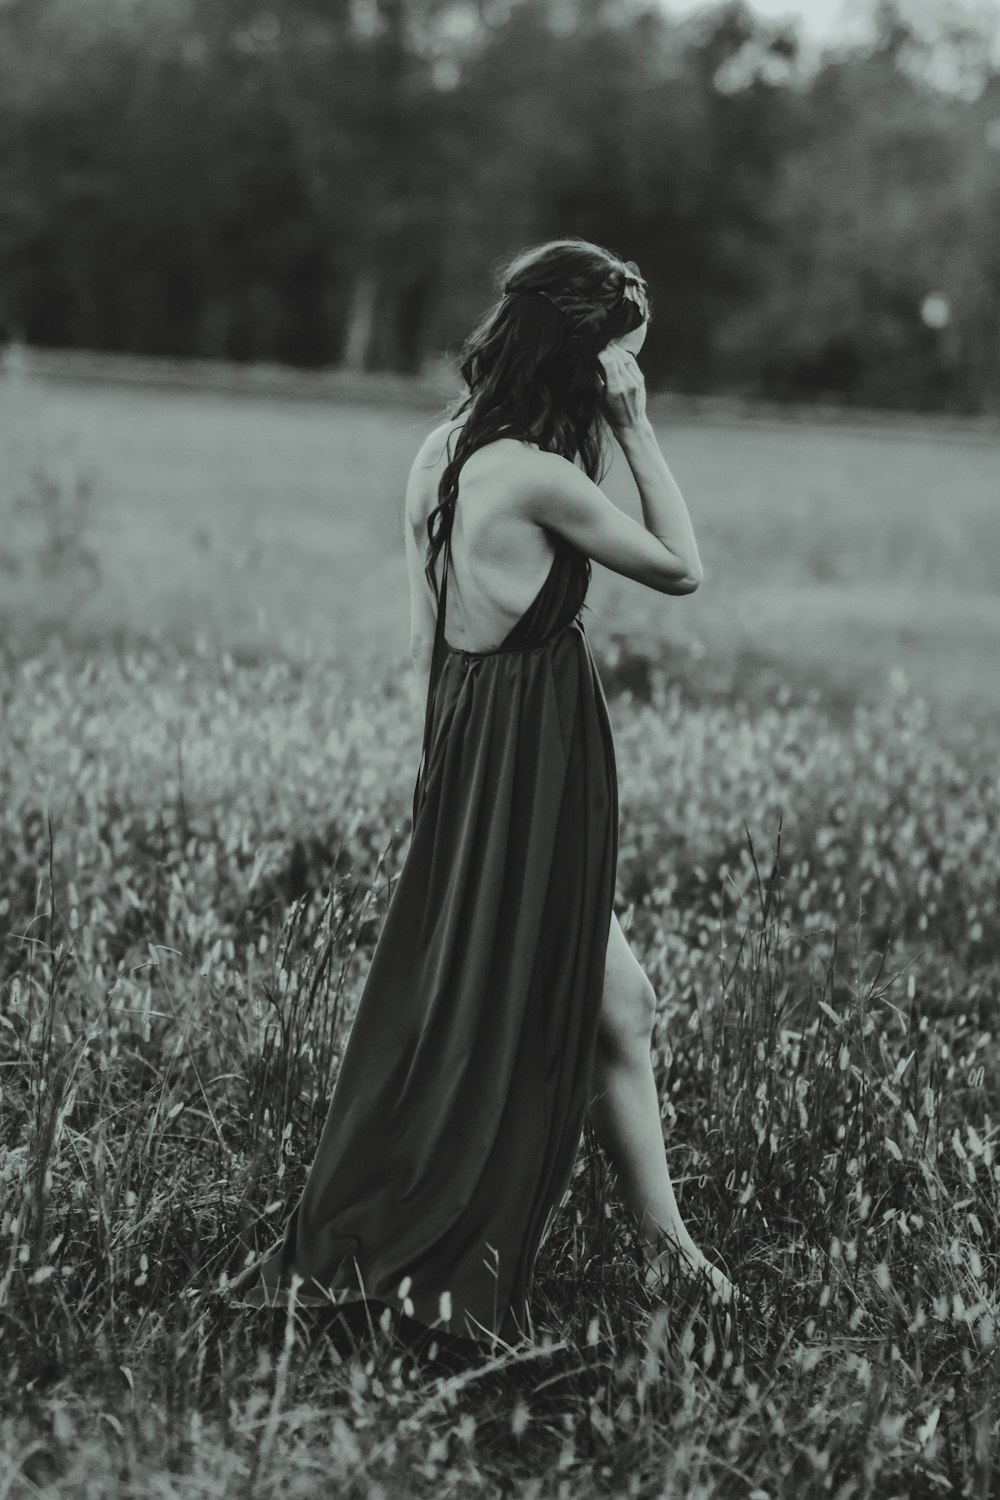 grayscale photography of woman wearing dress on grass field while standing